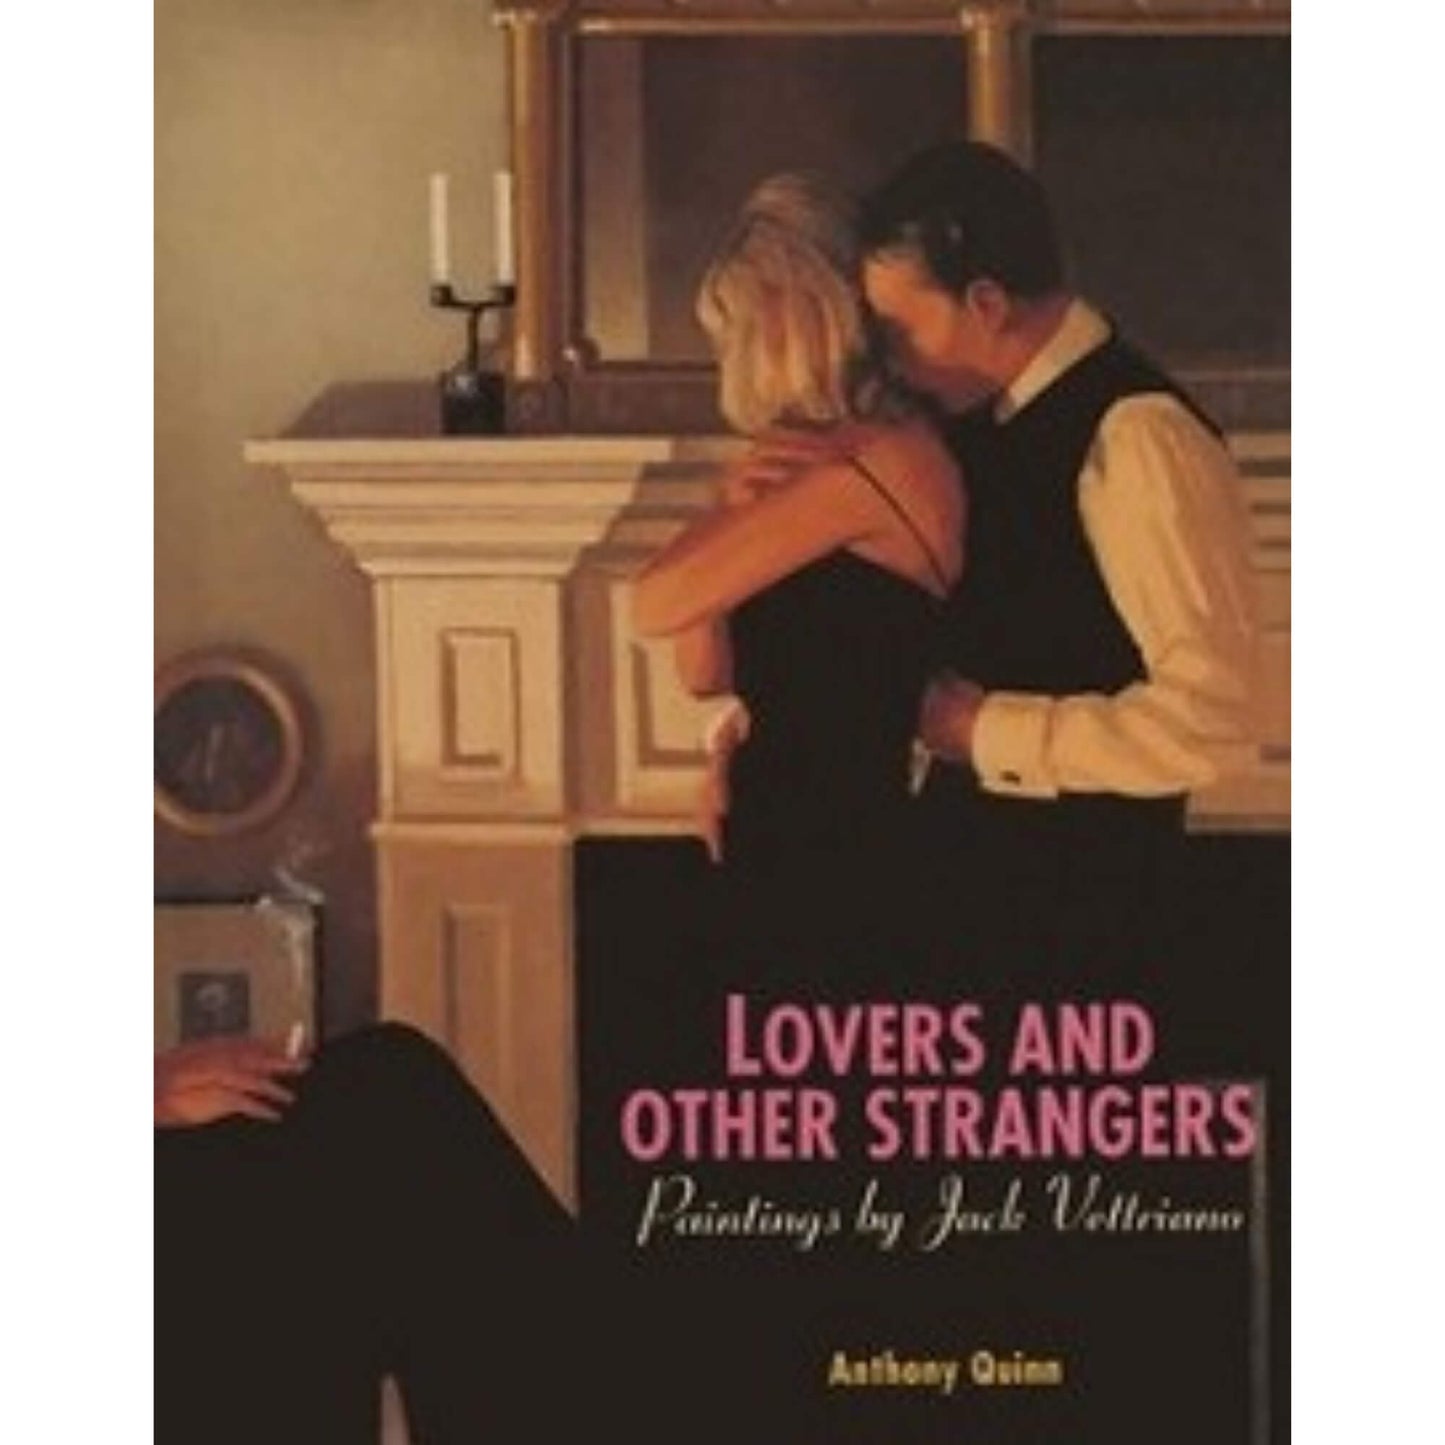 Lovers and Other Strangers - Signed Book